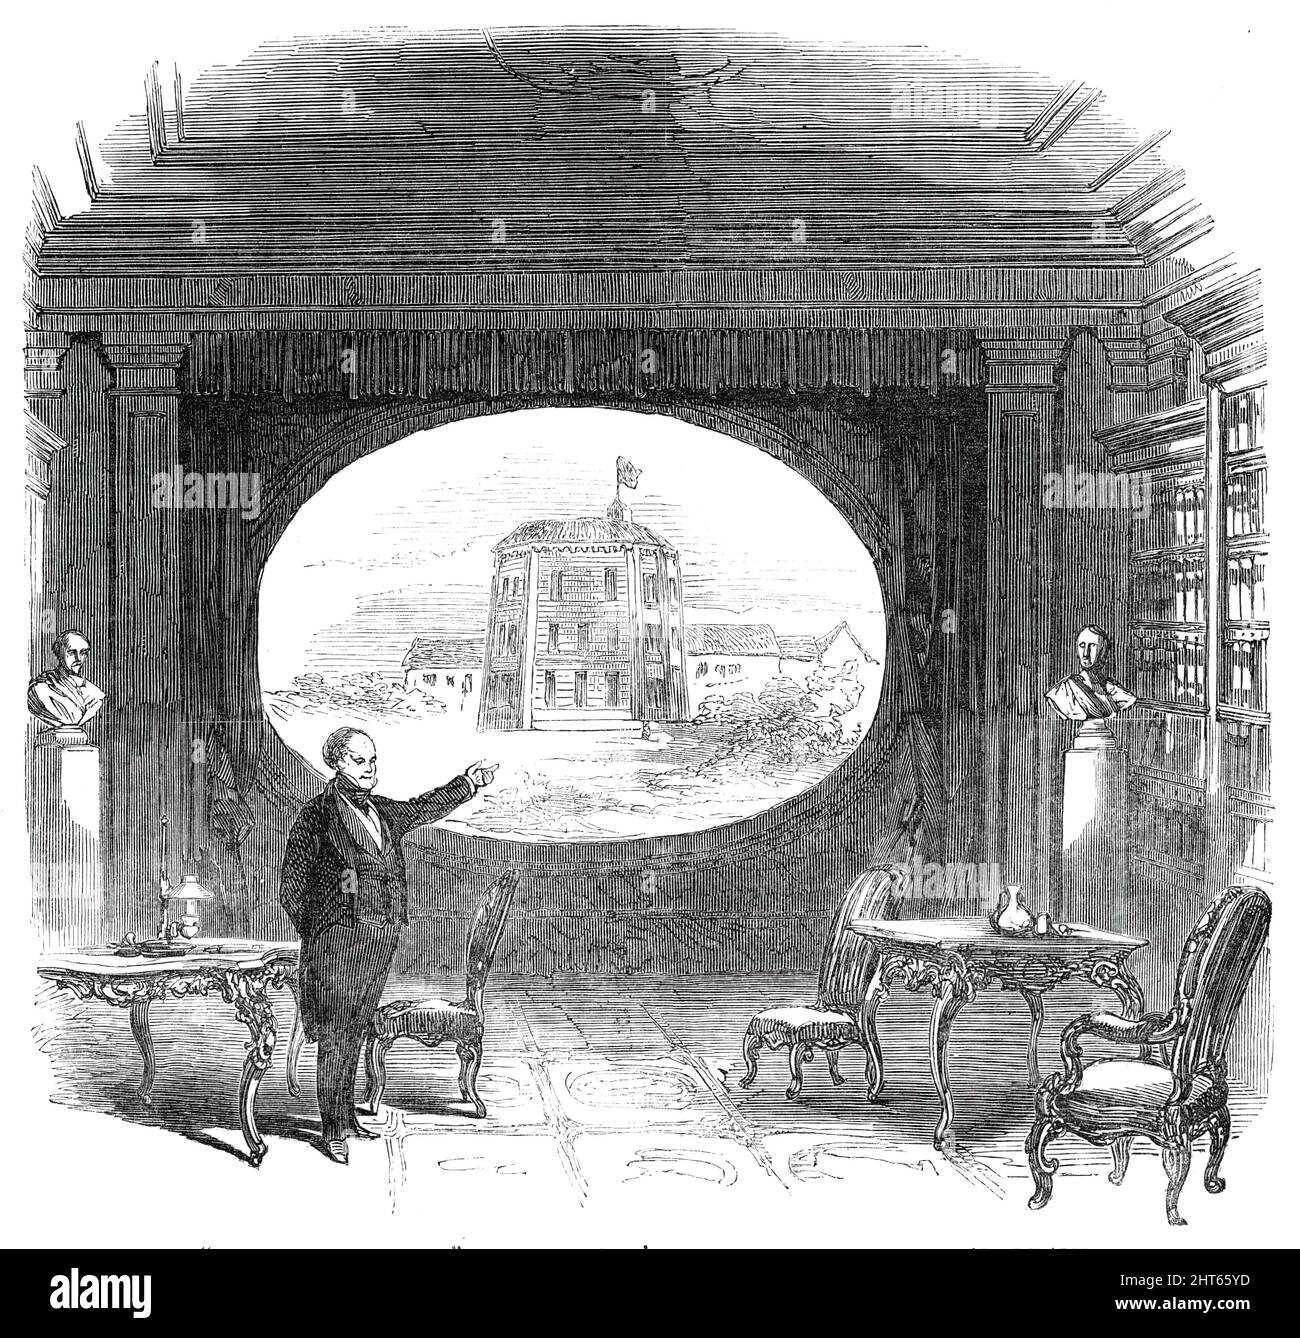 Mr. Bunn on the Stage, at the St. James's Theatre - Scene the Blackfriars Theatre, [London], 1850. '...a &quot;monologue&quot;...on things theatrical, on the great Shakspeare...The argument was relieved by jests old and new, by anecdotes ditto, and by recitations which showed considerable histrionic talent...Mr. Bunn delivered his lecture with much ease and tact, though not without signs of weariness towards the conclusion - a result not to be wondered at, considering that he spoke altogether for more than three hours. In treating of the &quot;genius and career of Shakspeare,&quot; Mr. Bunn il Stock Photo